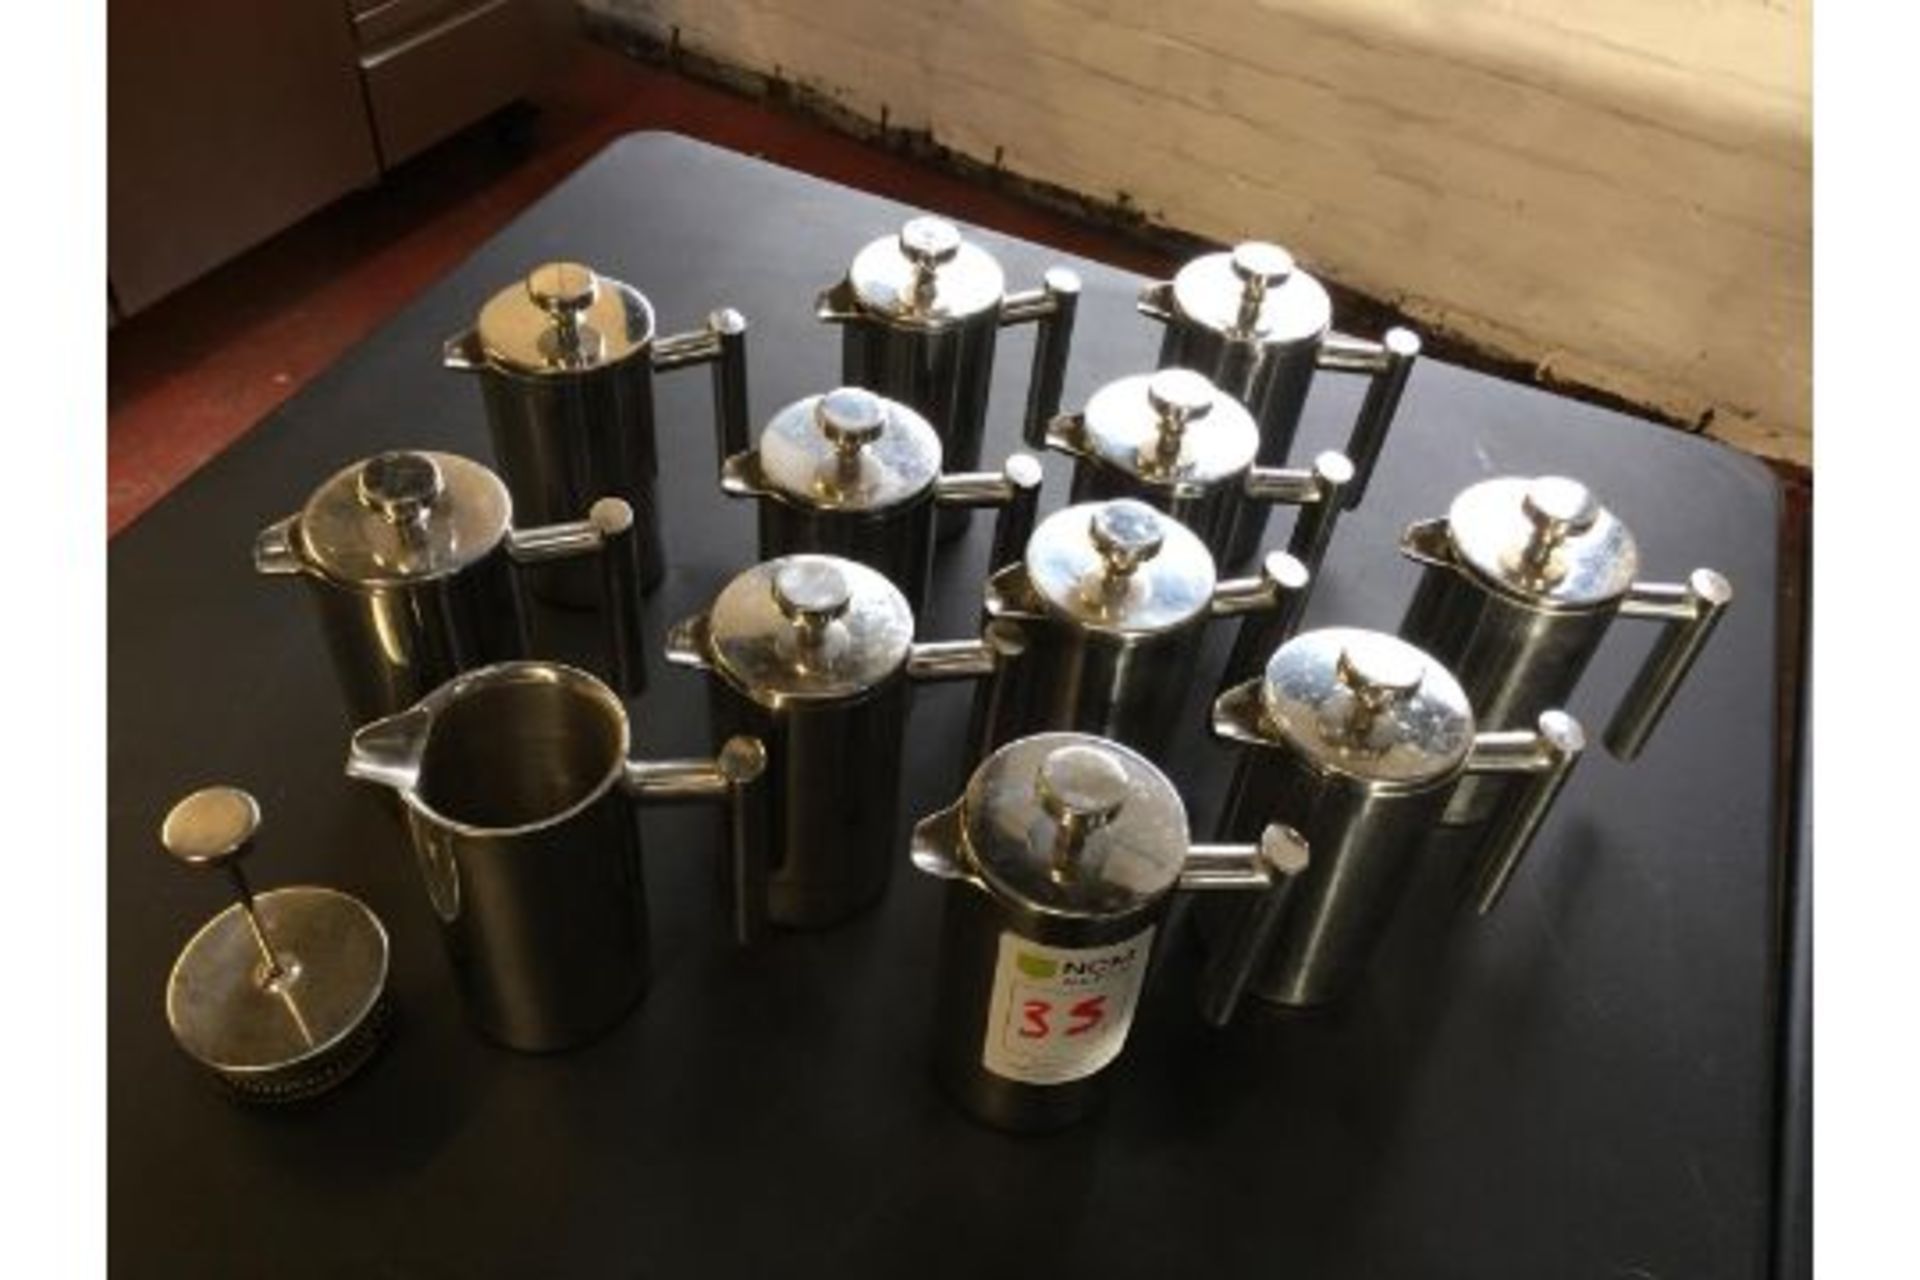 Stainless steel coffee pots - Image 3 of 4